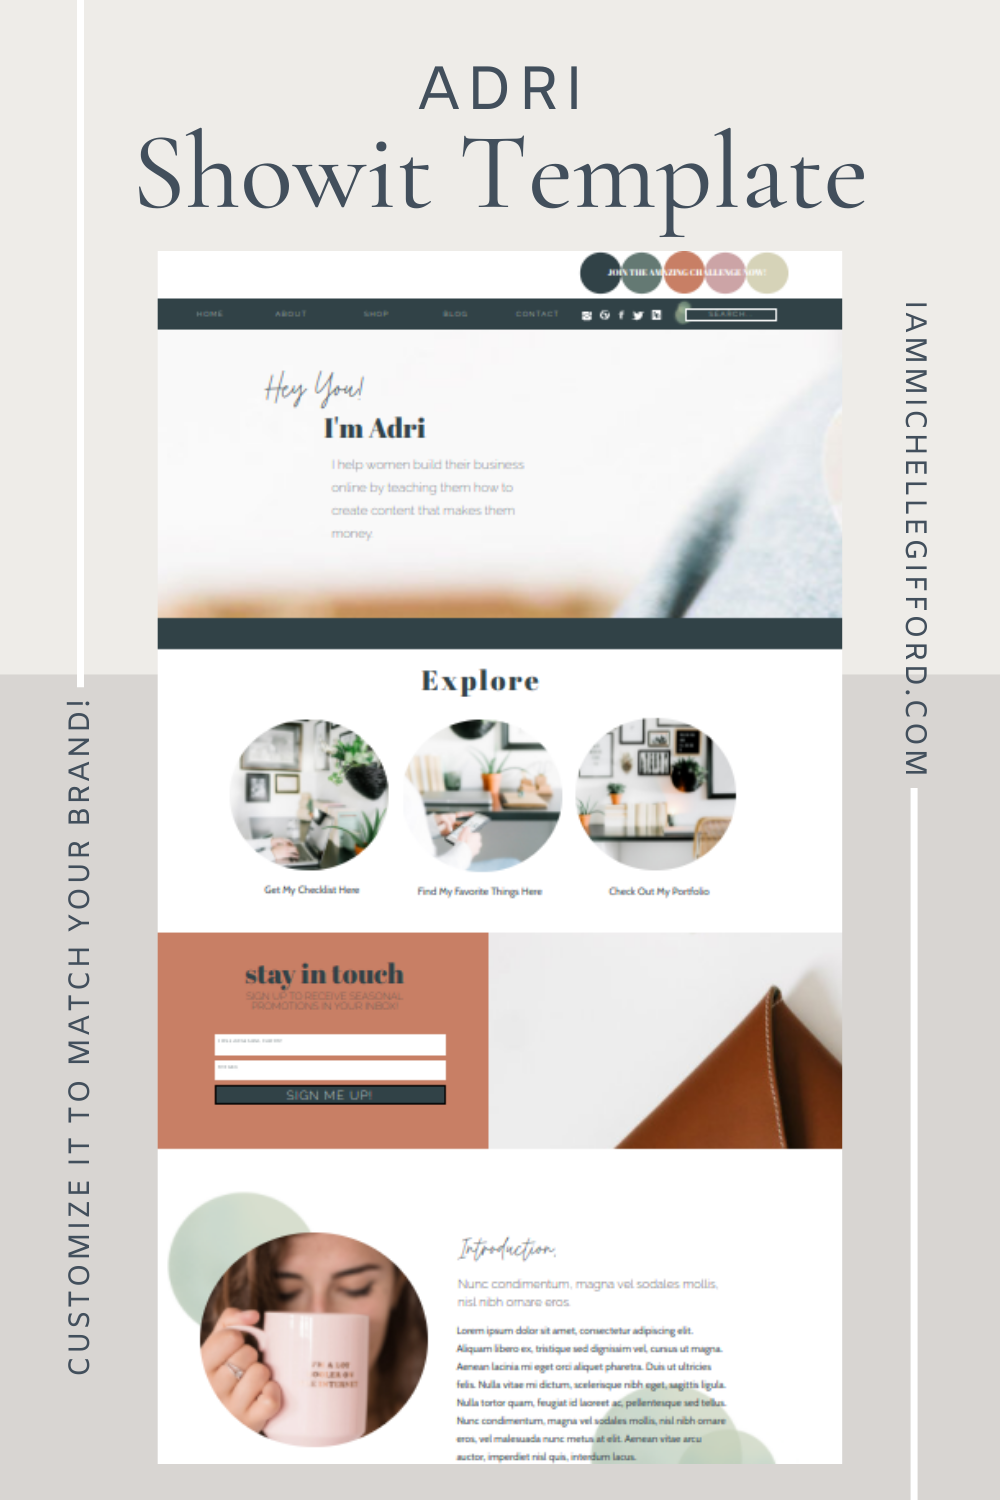 Pick and customize your Showit template to fit your brand and business website. www.iammichellegifford.com